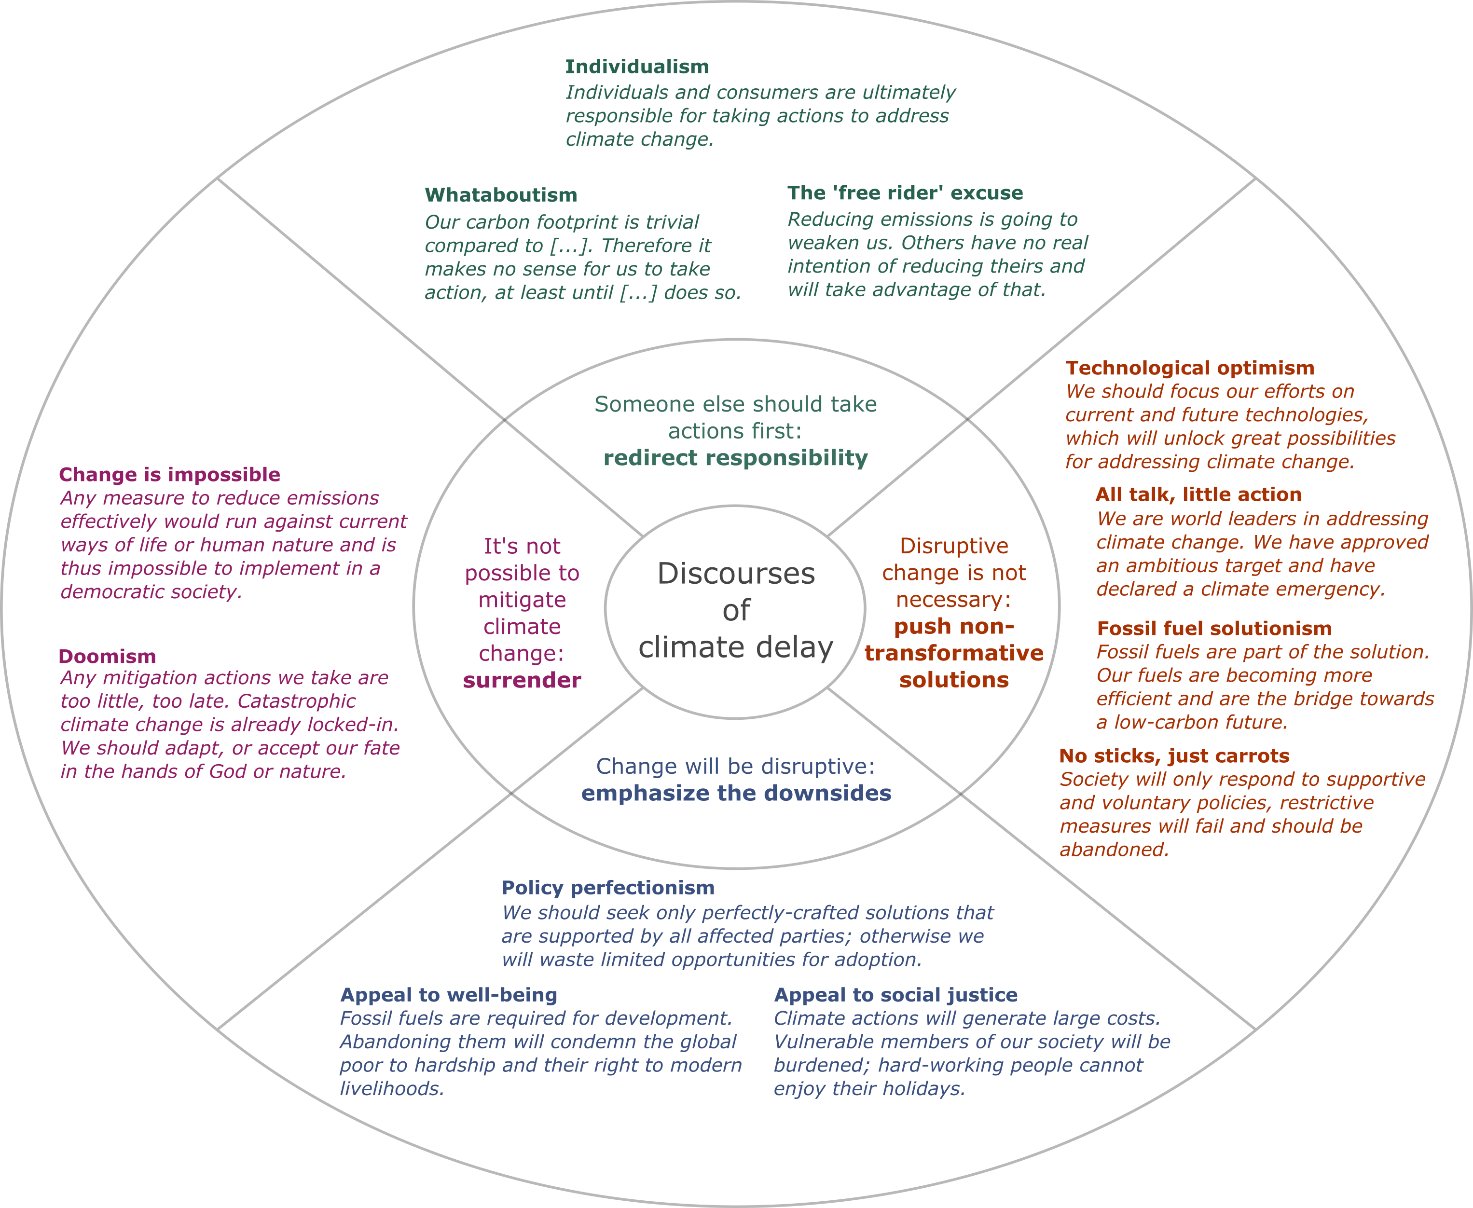 Typology of climate delay discourses